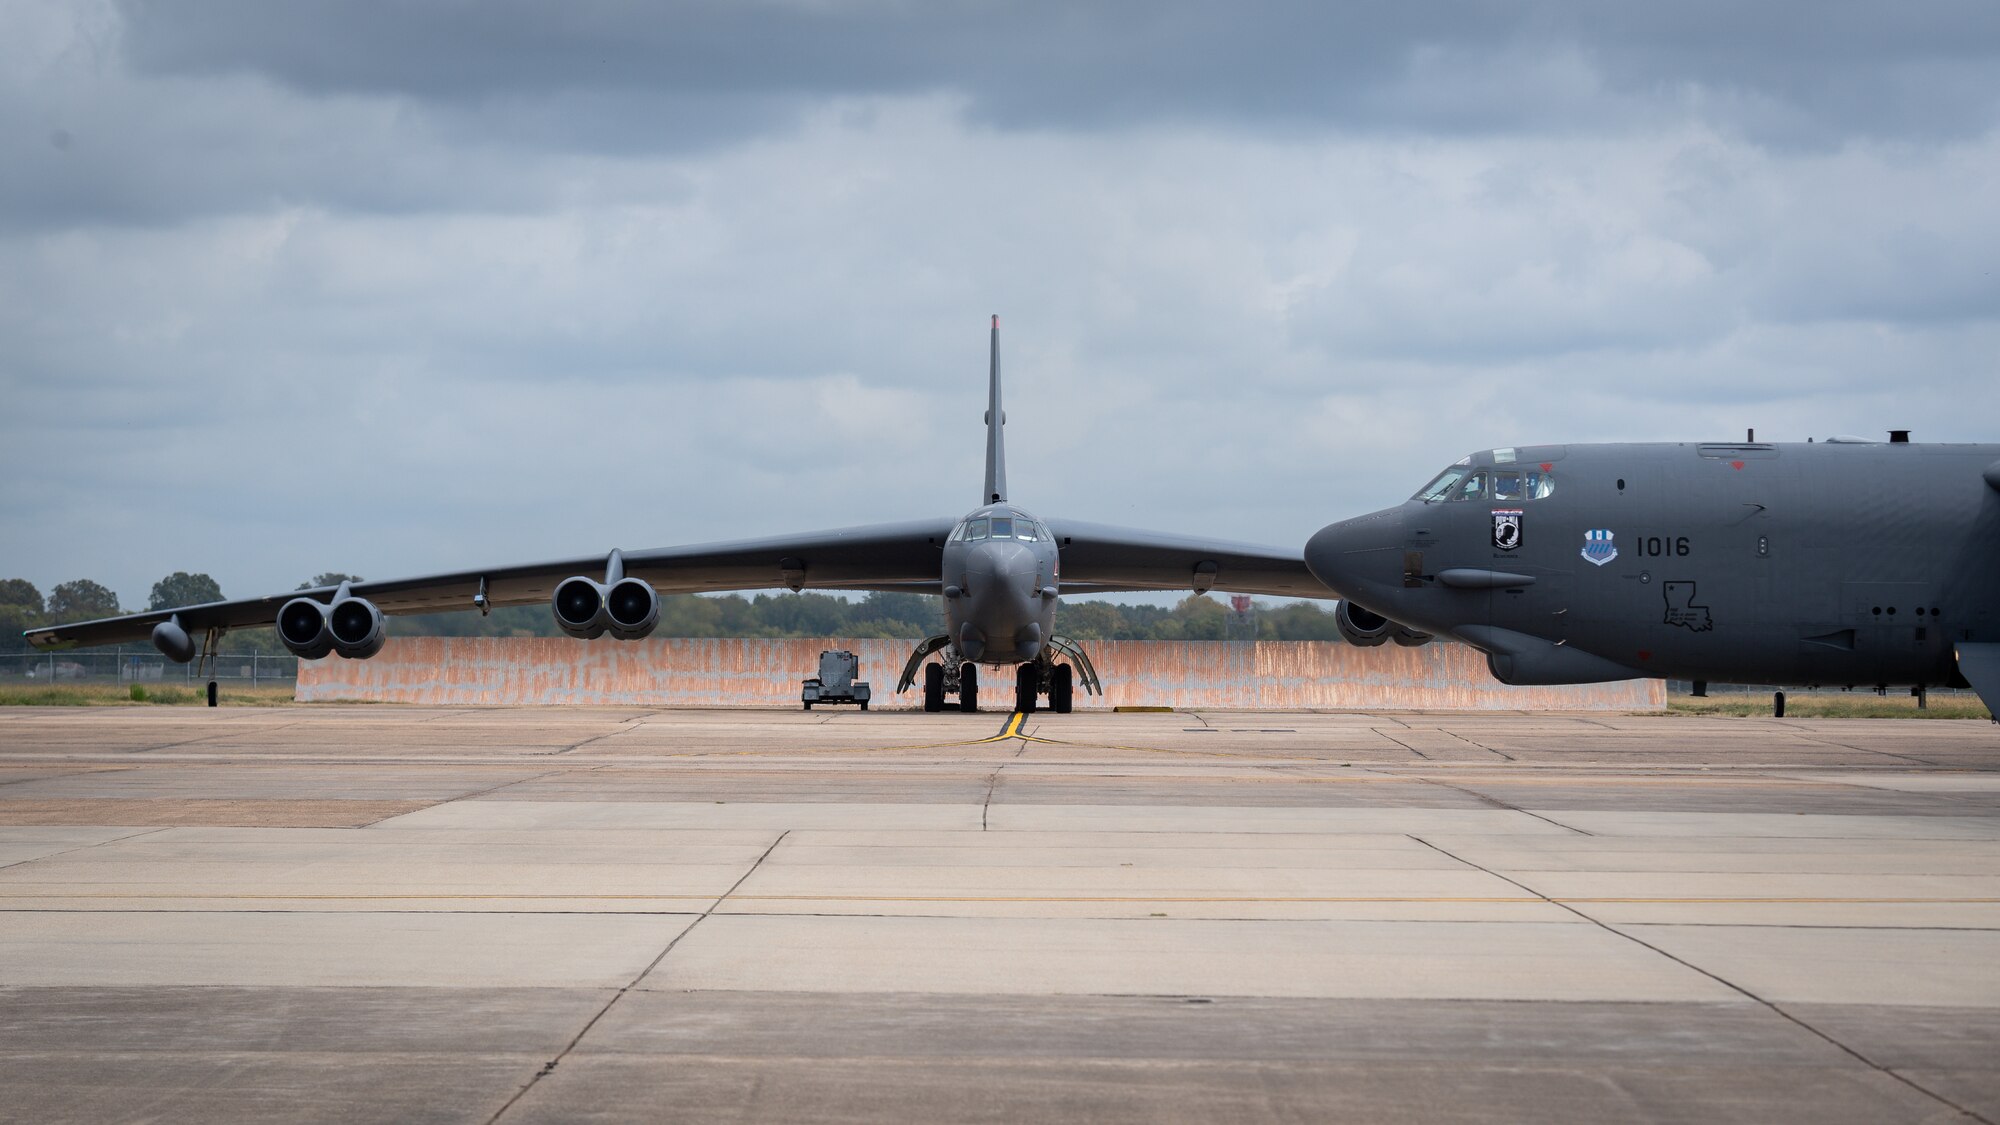 A B-52H Stratofortress taxis down the flight line during Global Thunder 21 at Barksdale Air Force Base, La., Oct. 23, 2020. The ability to credibly convey the readiness and lethality of our forces is a key component of strategic deterrence. (U.S. Air Force photo by Senior Airman Lillian Miller)